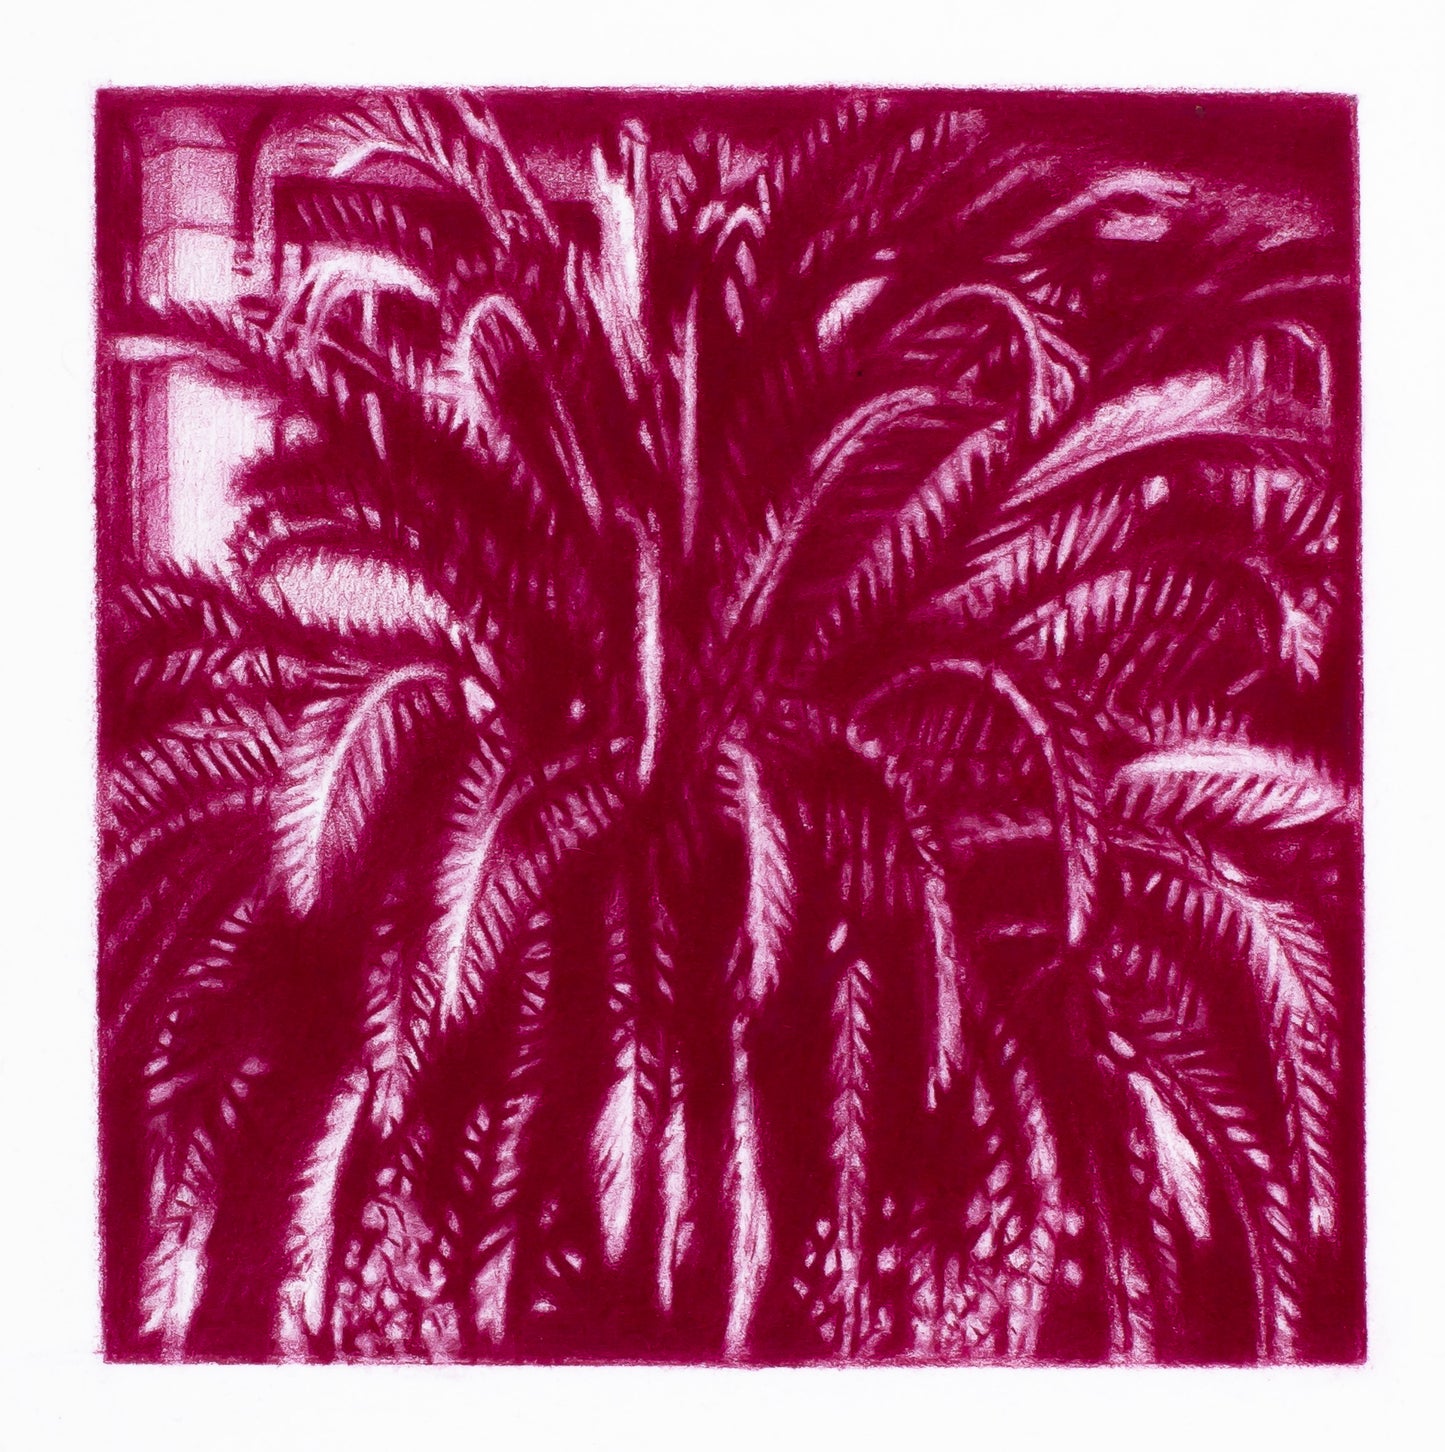 Palm at Matisse's home (Vence), 2020